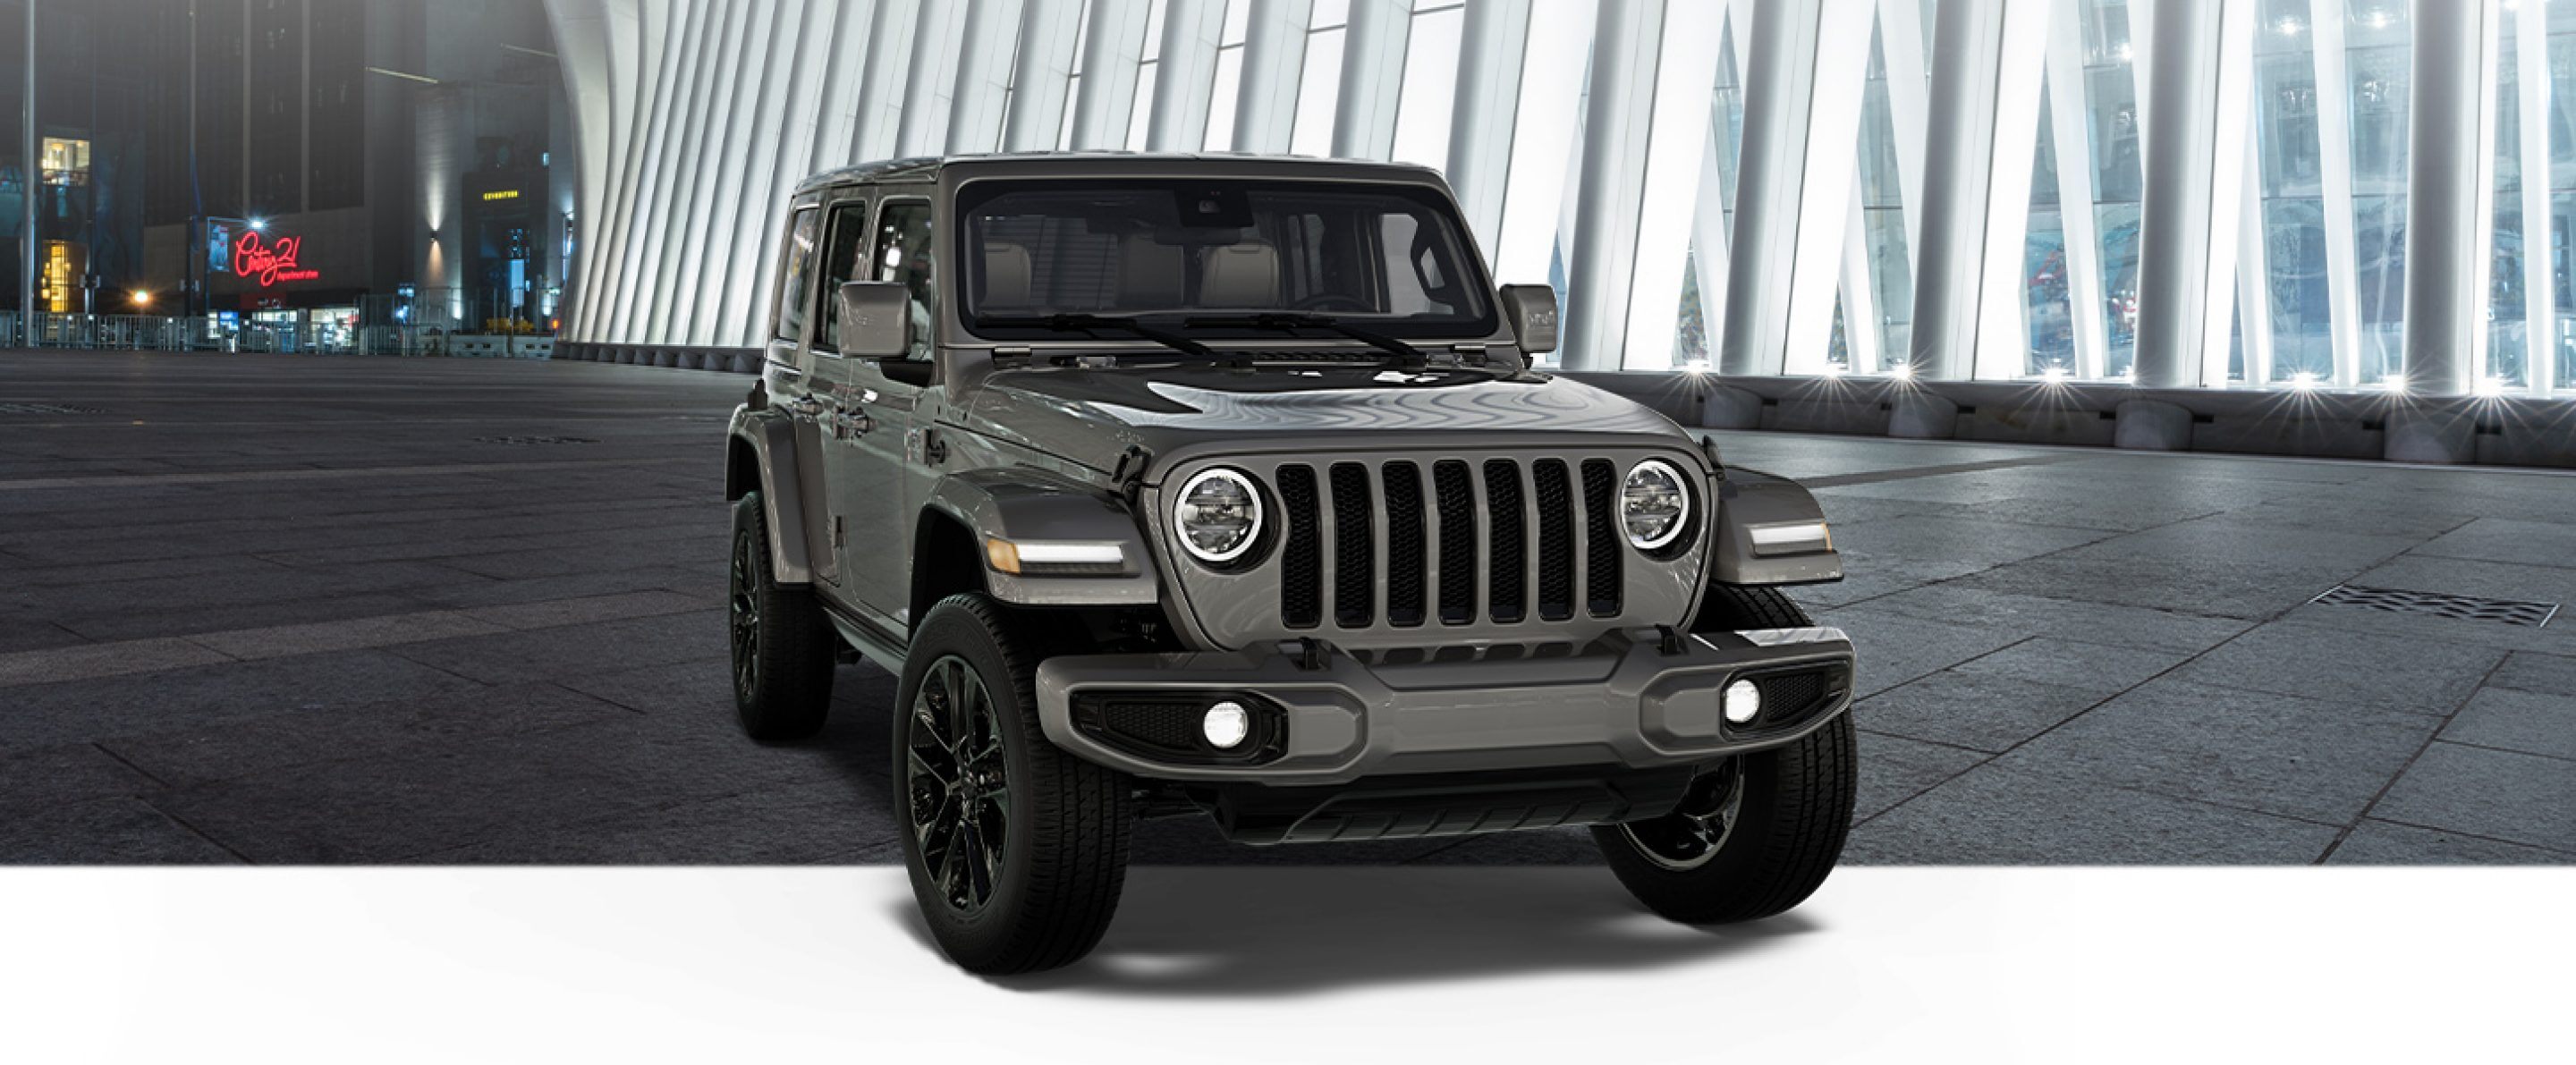 2020 Jeep Wrangler Unlimited High Altitude: Most Expensive Model Made